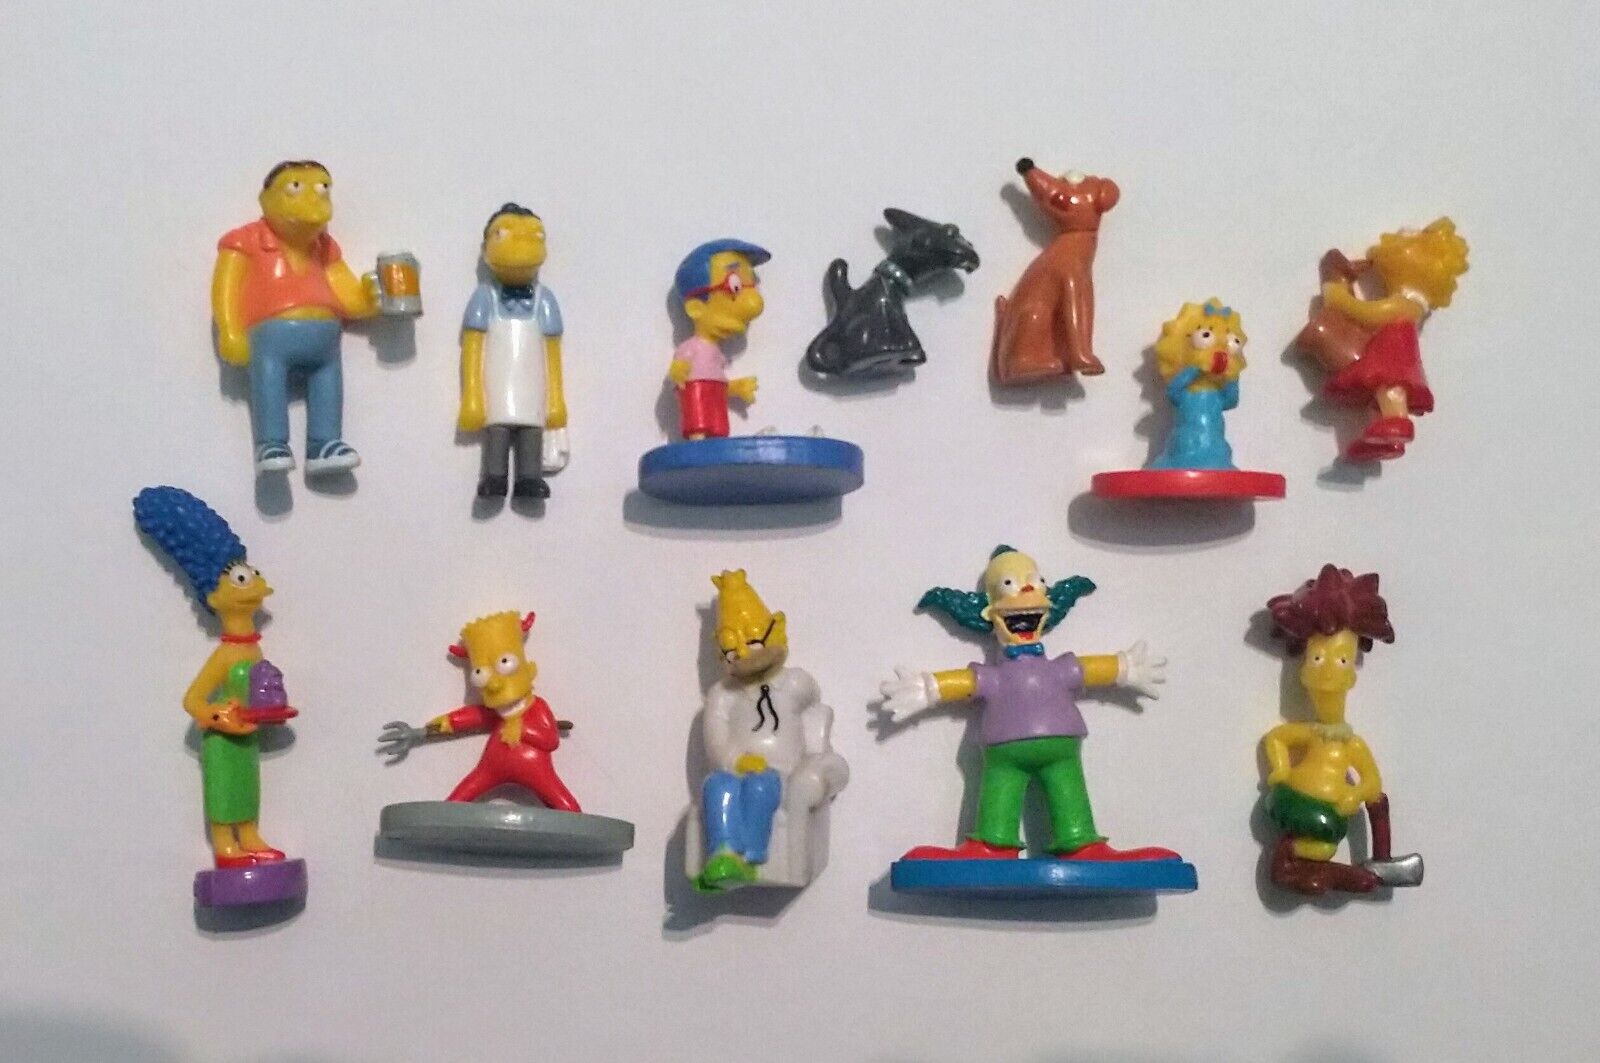 THE SIMPSONS COLLECTION FIGURINES SET - VINTAGE FIGURES COLLECTIBLES MINIATURES